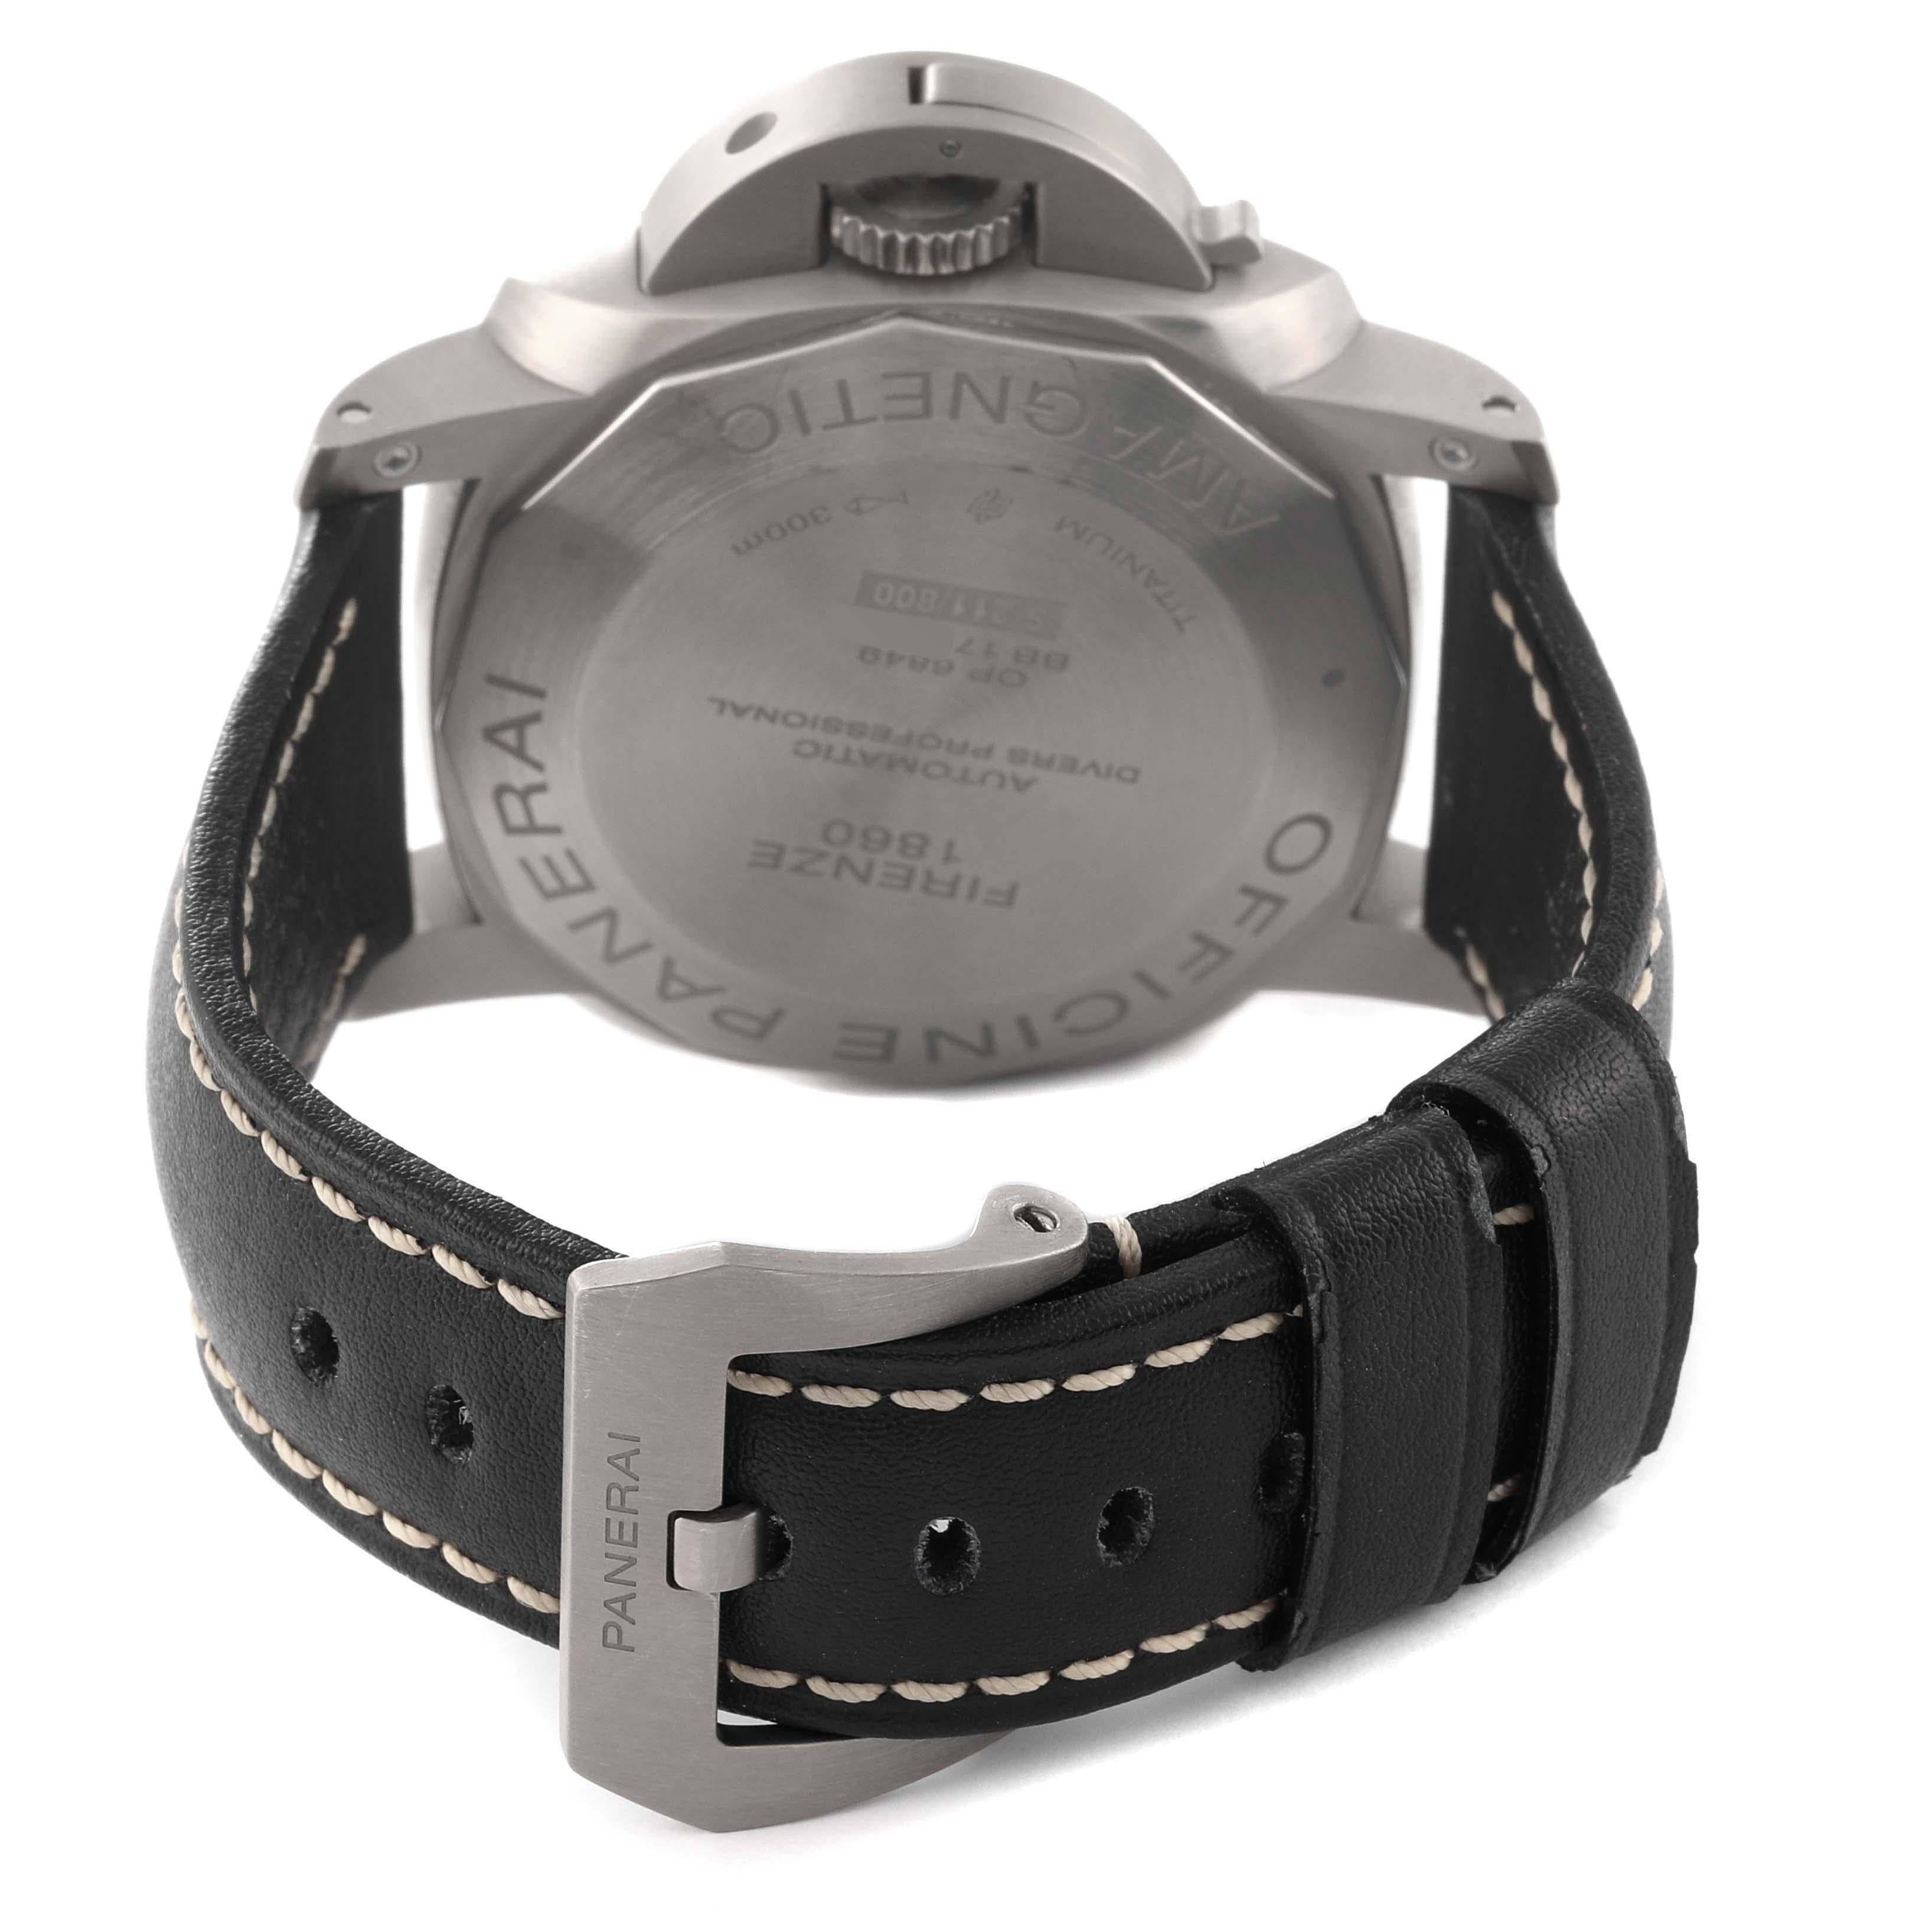 Panerai Luminor Submersible 1950 Titanium Amagnetic Watch PAM00389 Box Papers For Sale 3